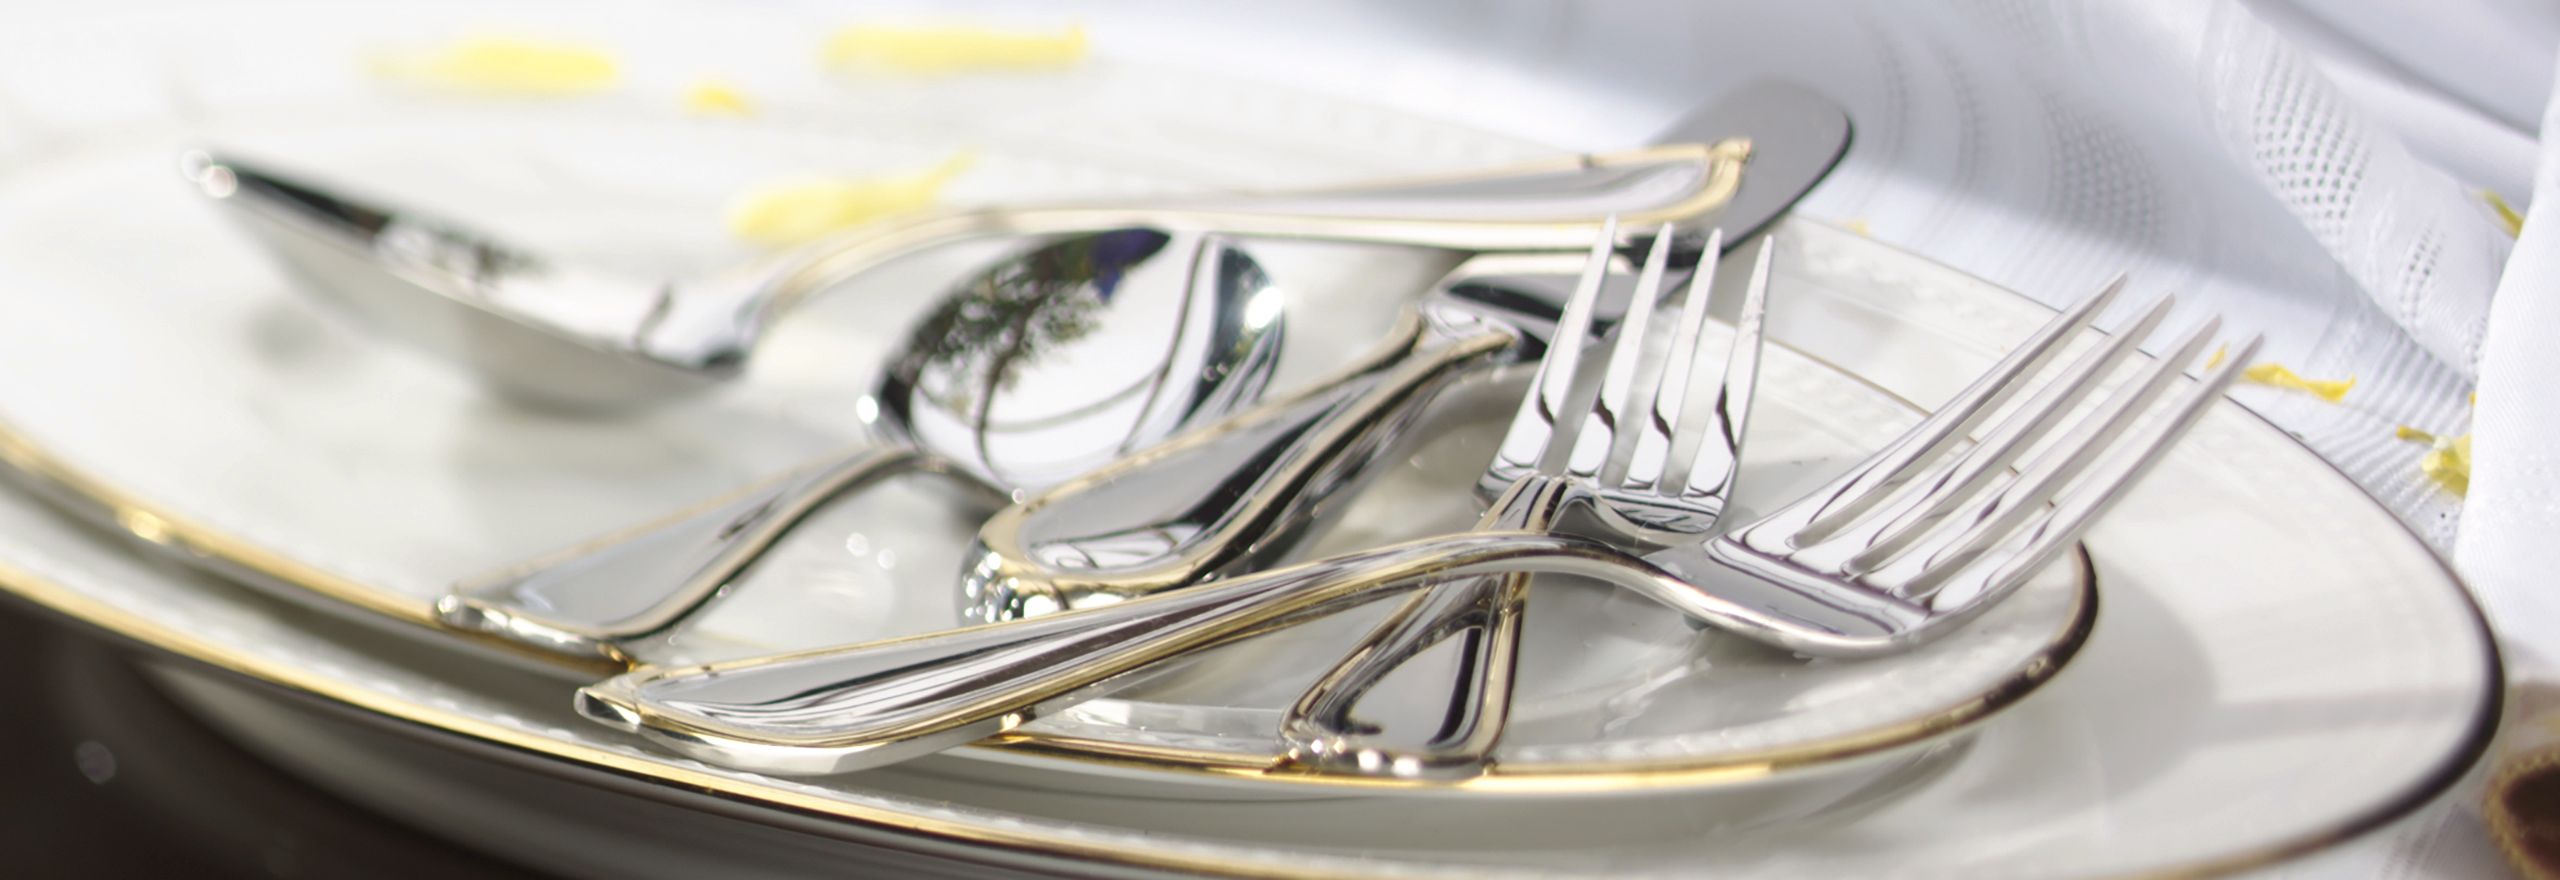 Silverware on a plate 